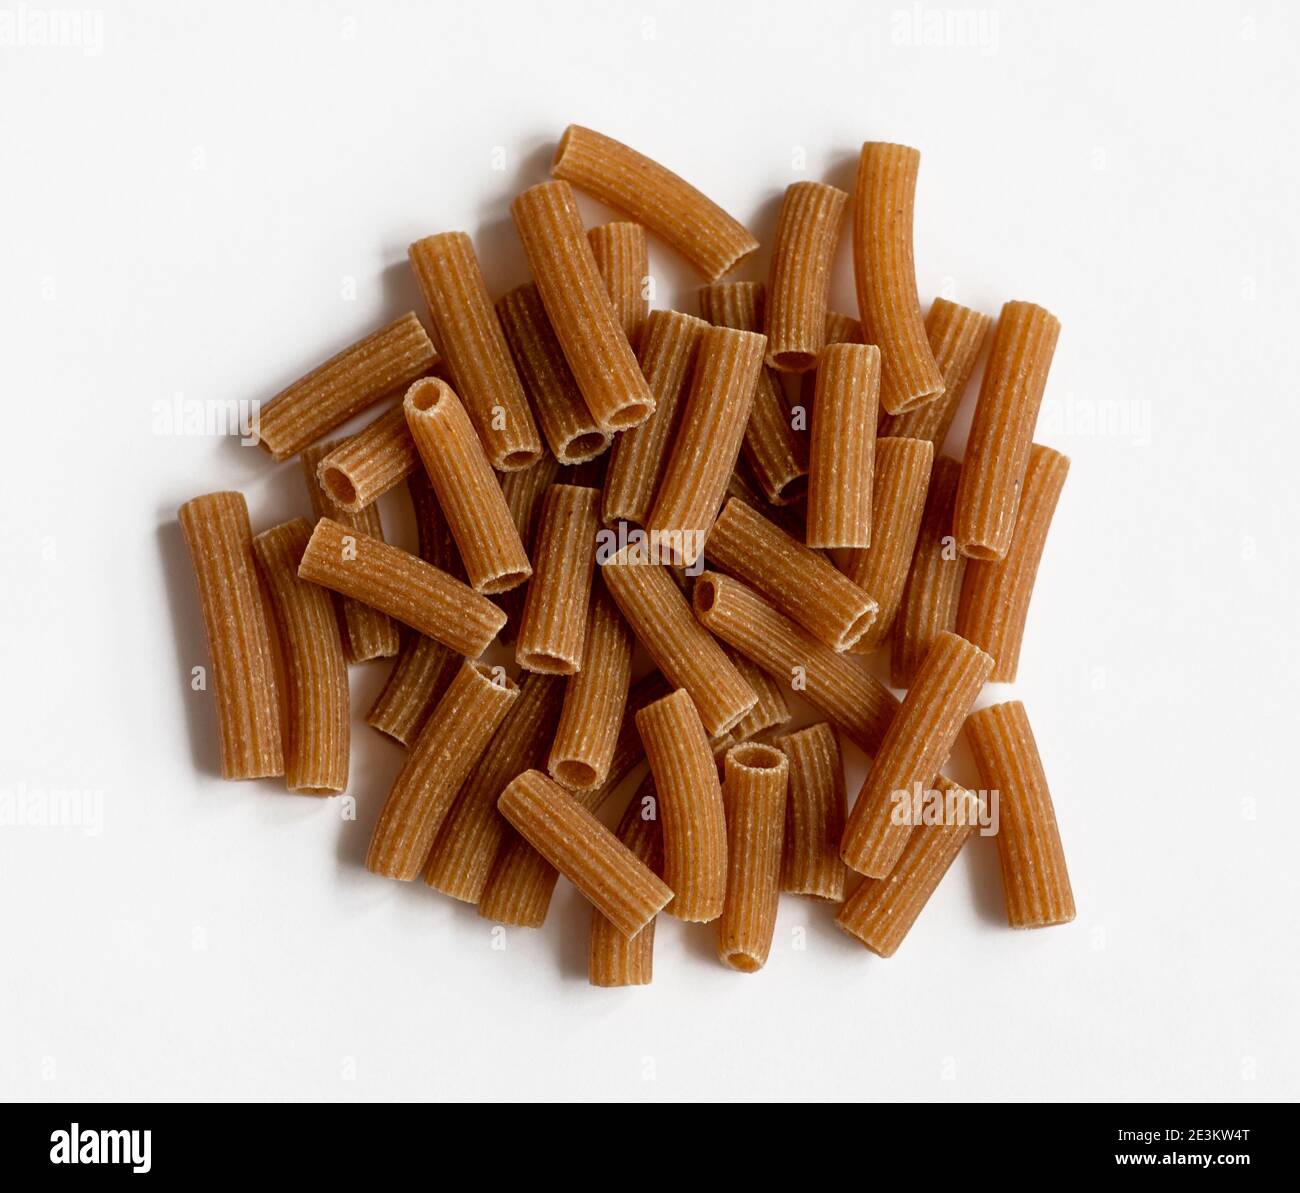 Raw whole grain brown pasta on a white background. Wholemeal pasta made of durum flour, rich in nutrients: protein, carbohydrates and fiber Stock Photo